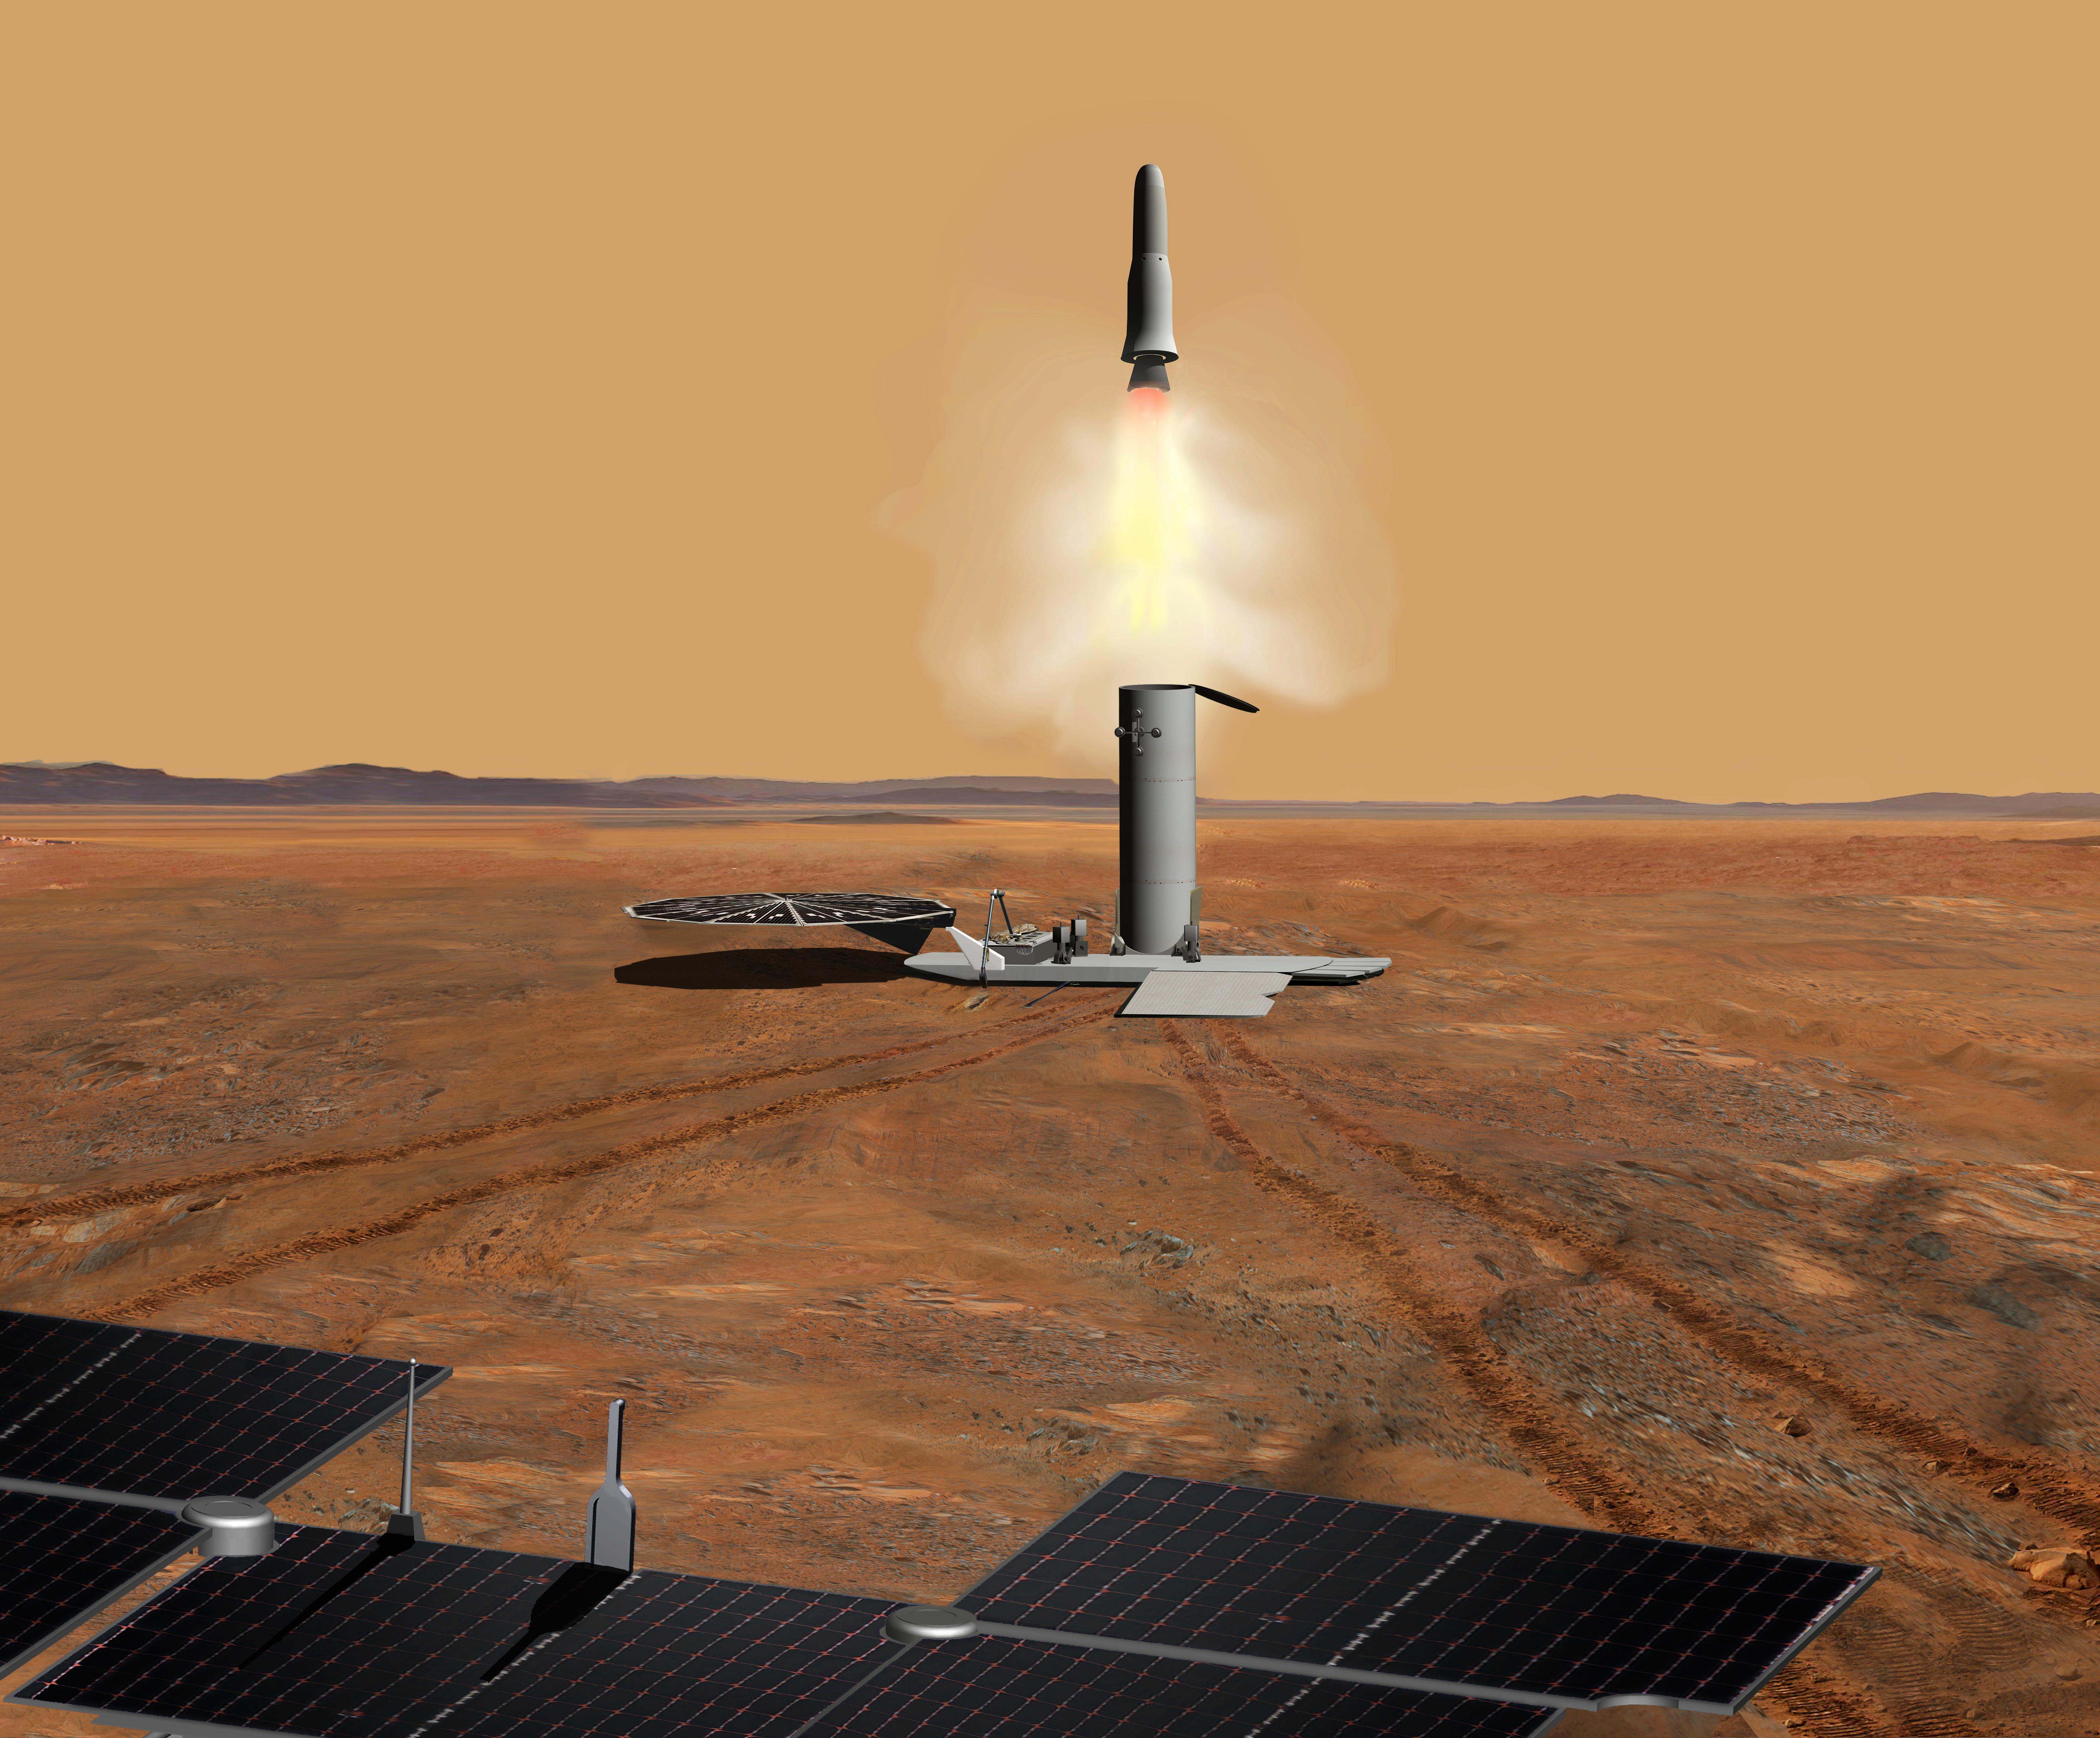 A future comes into focus for the Mars Exploration Program | The Planetary Society6478 x 5360